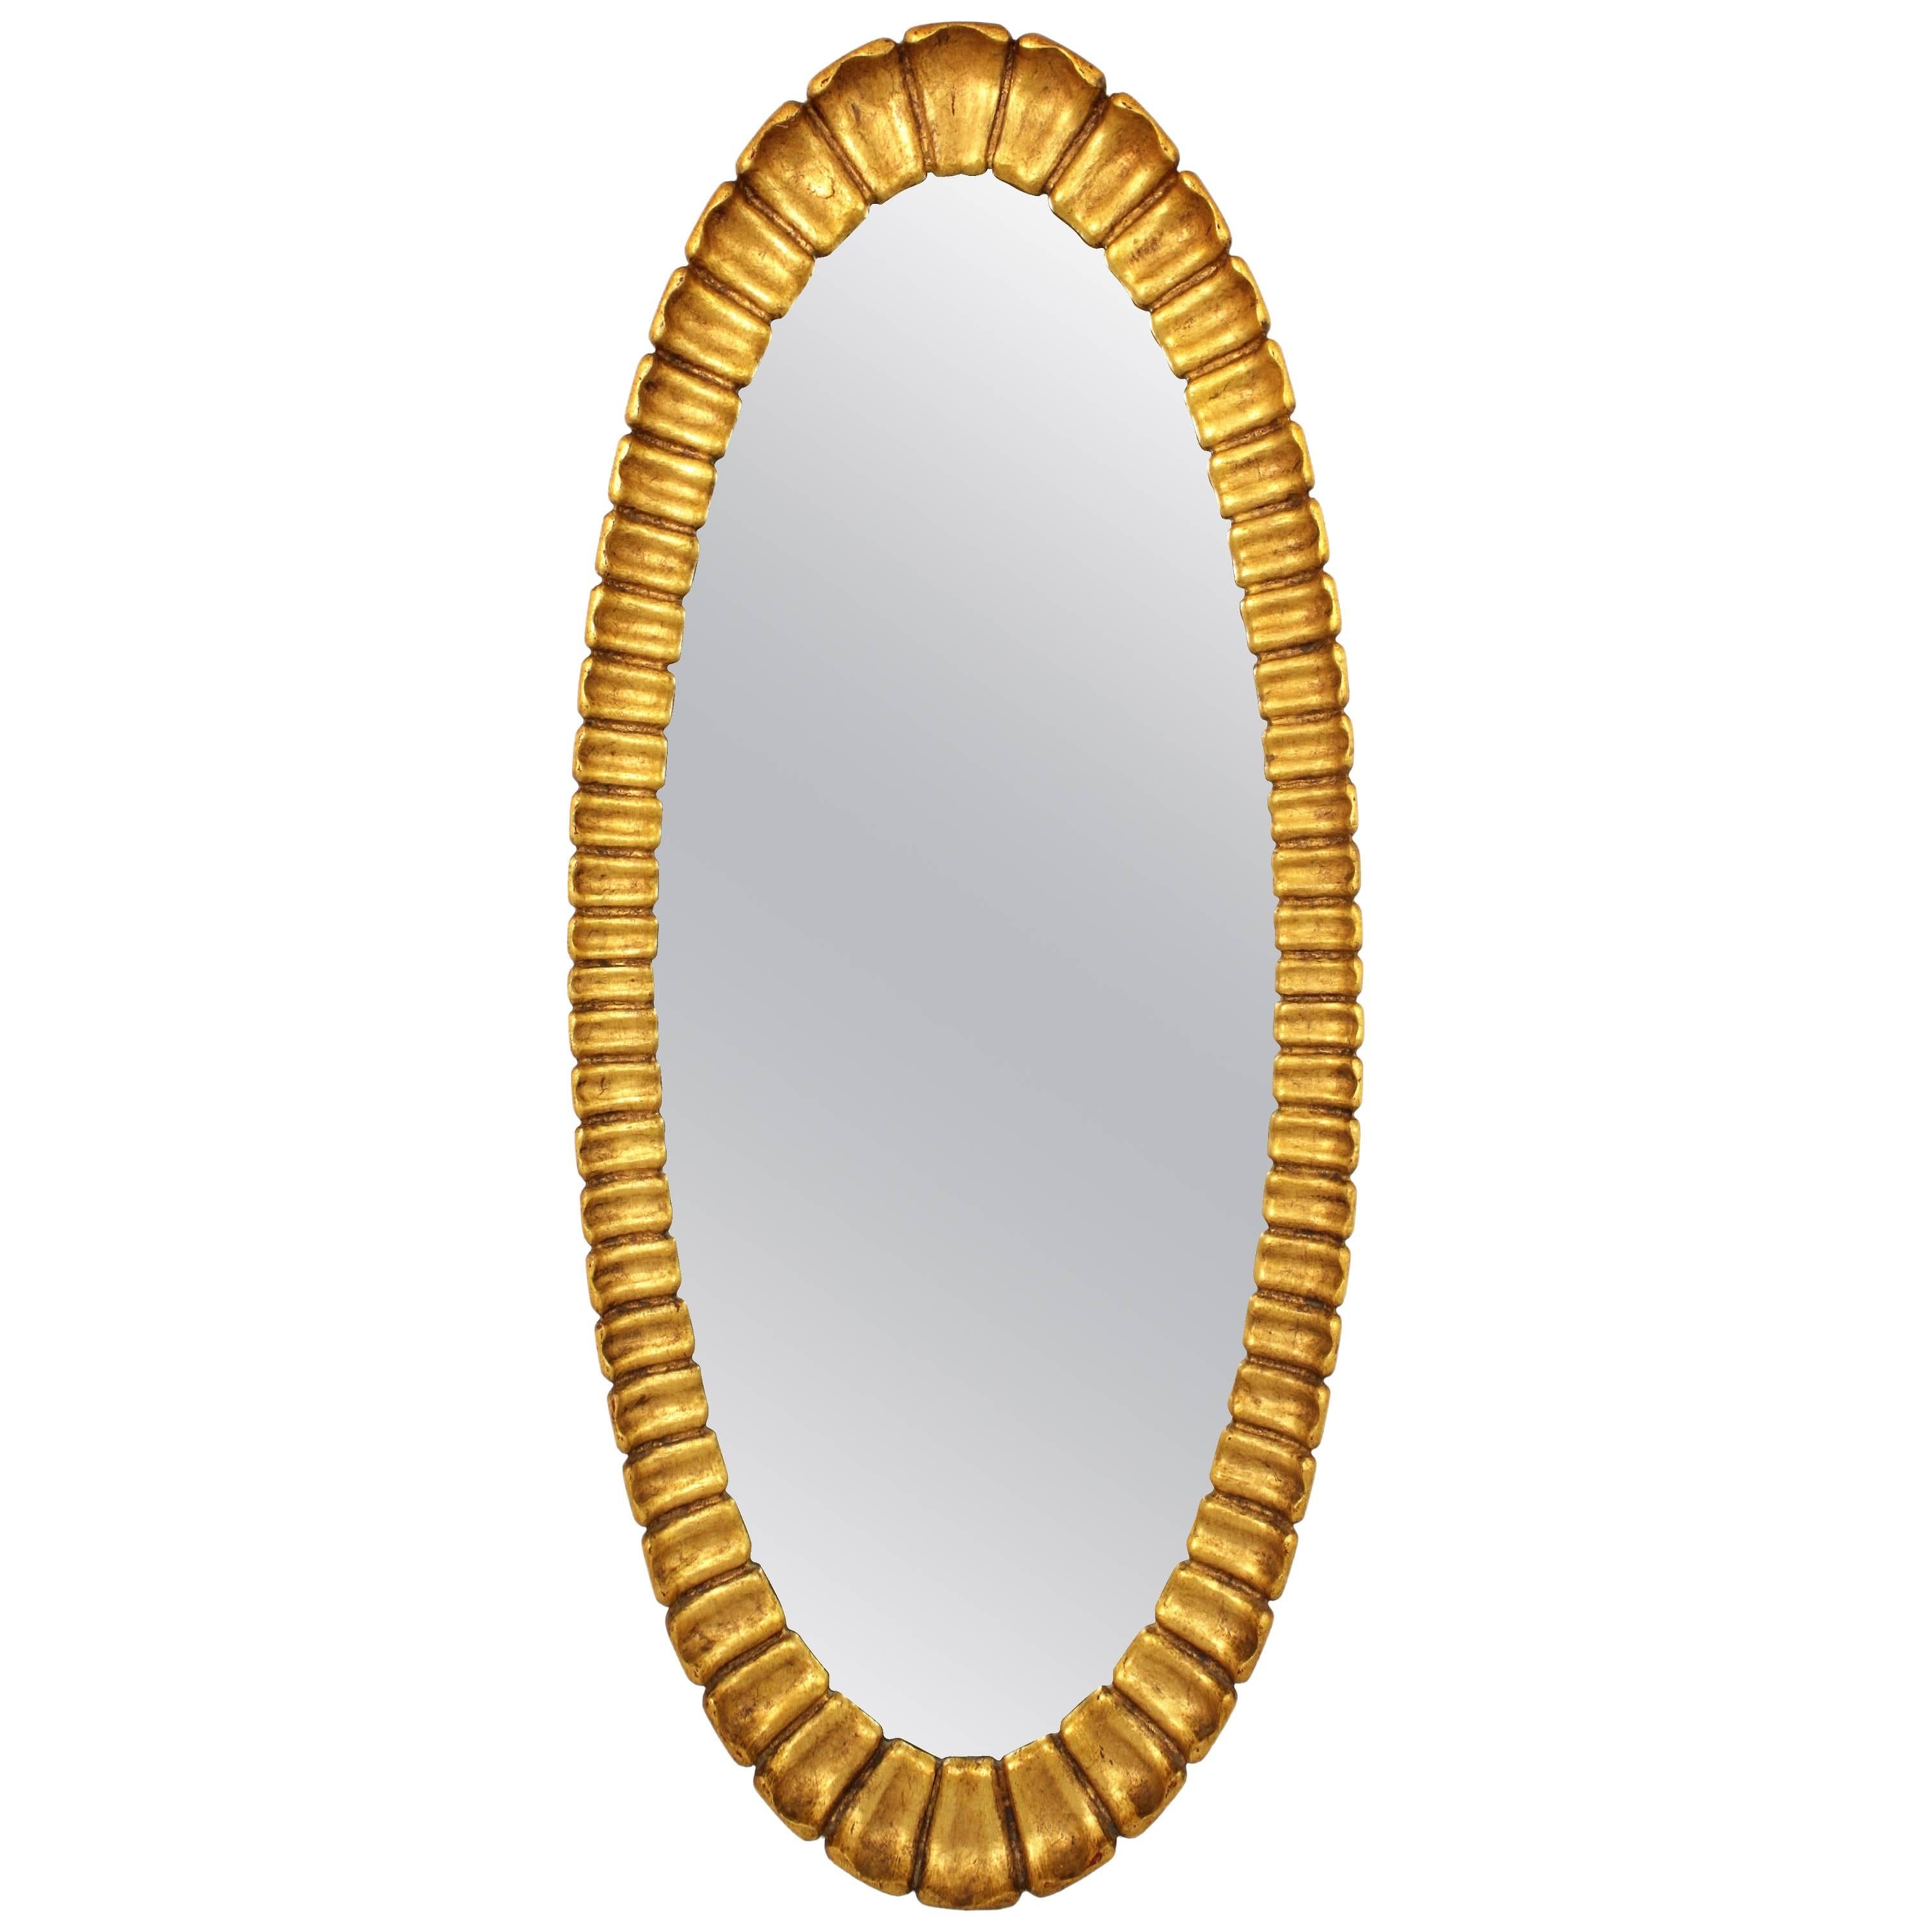 Hollywood Regency Francisco Hurtado Carved and Giltwood Oval Mirror, Spain